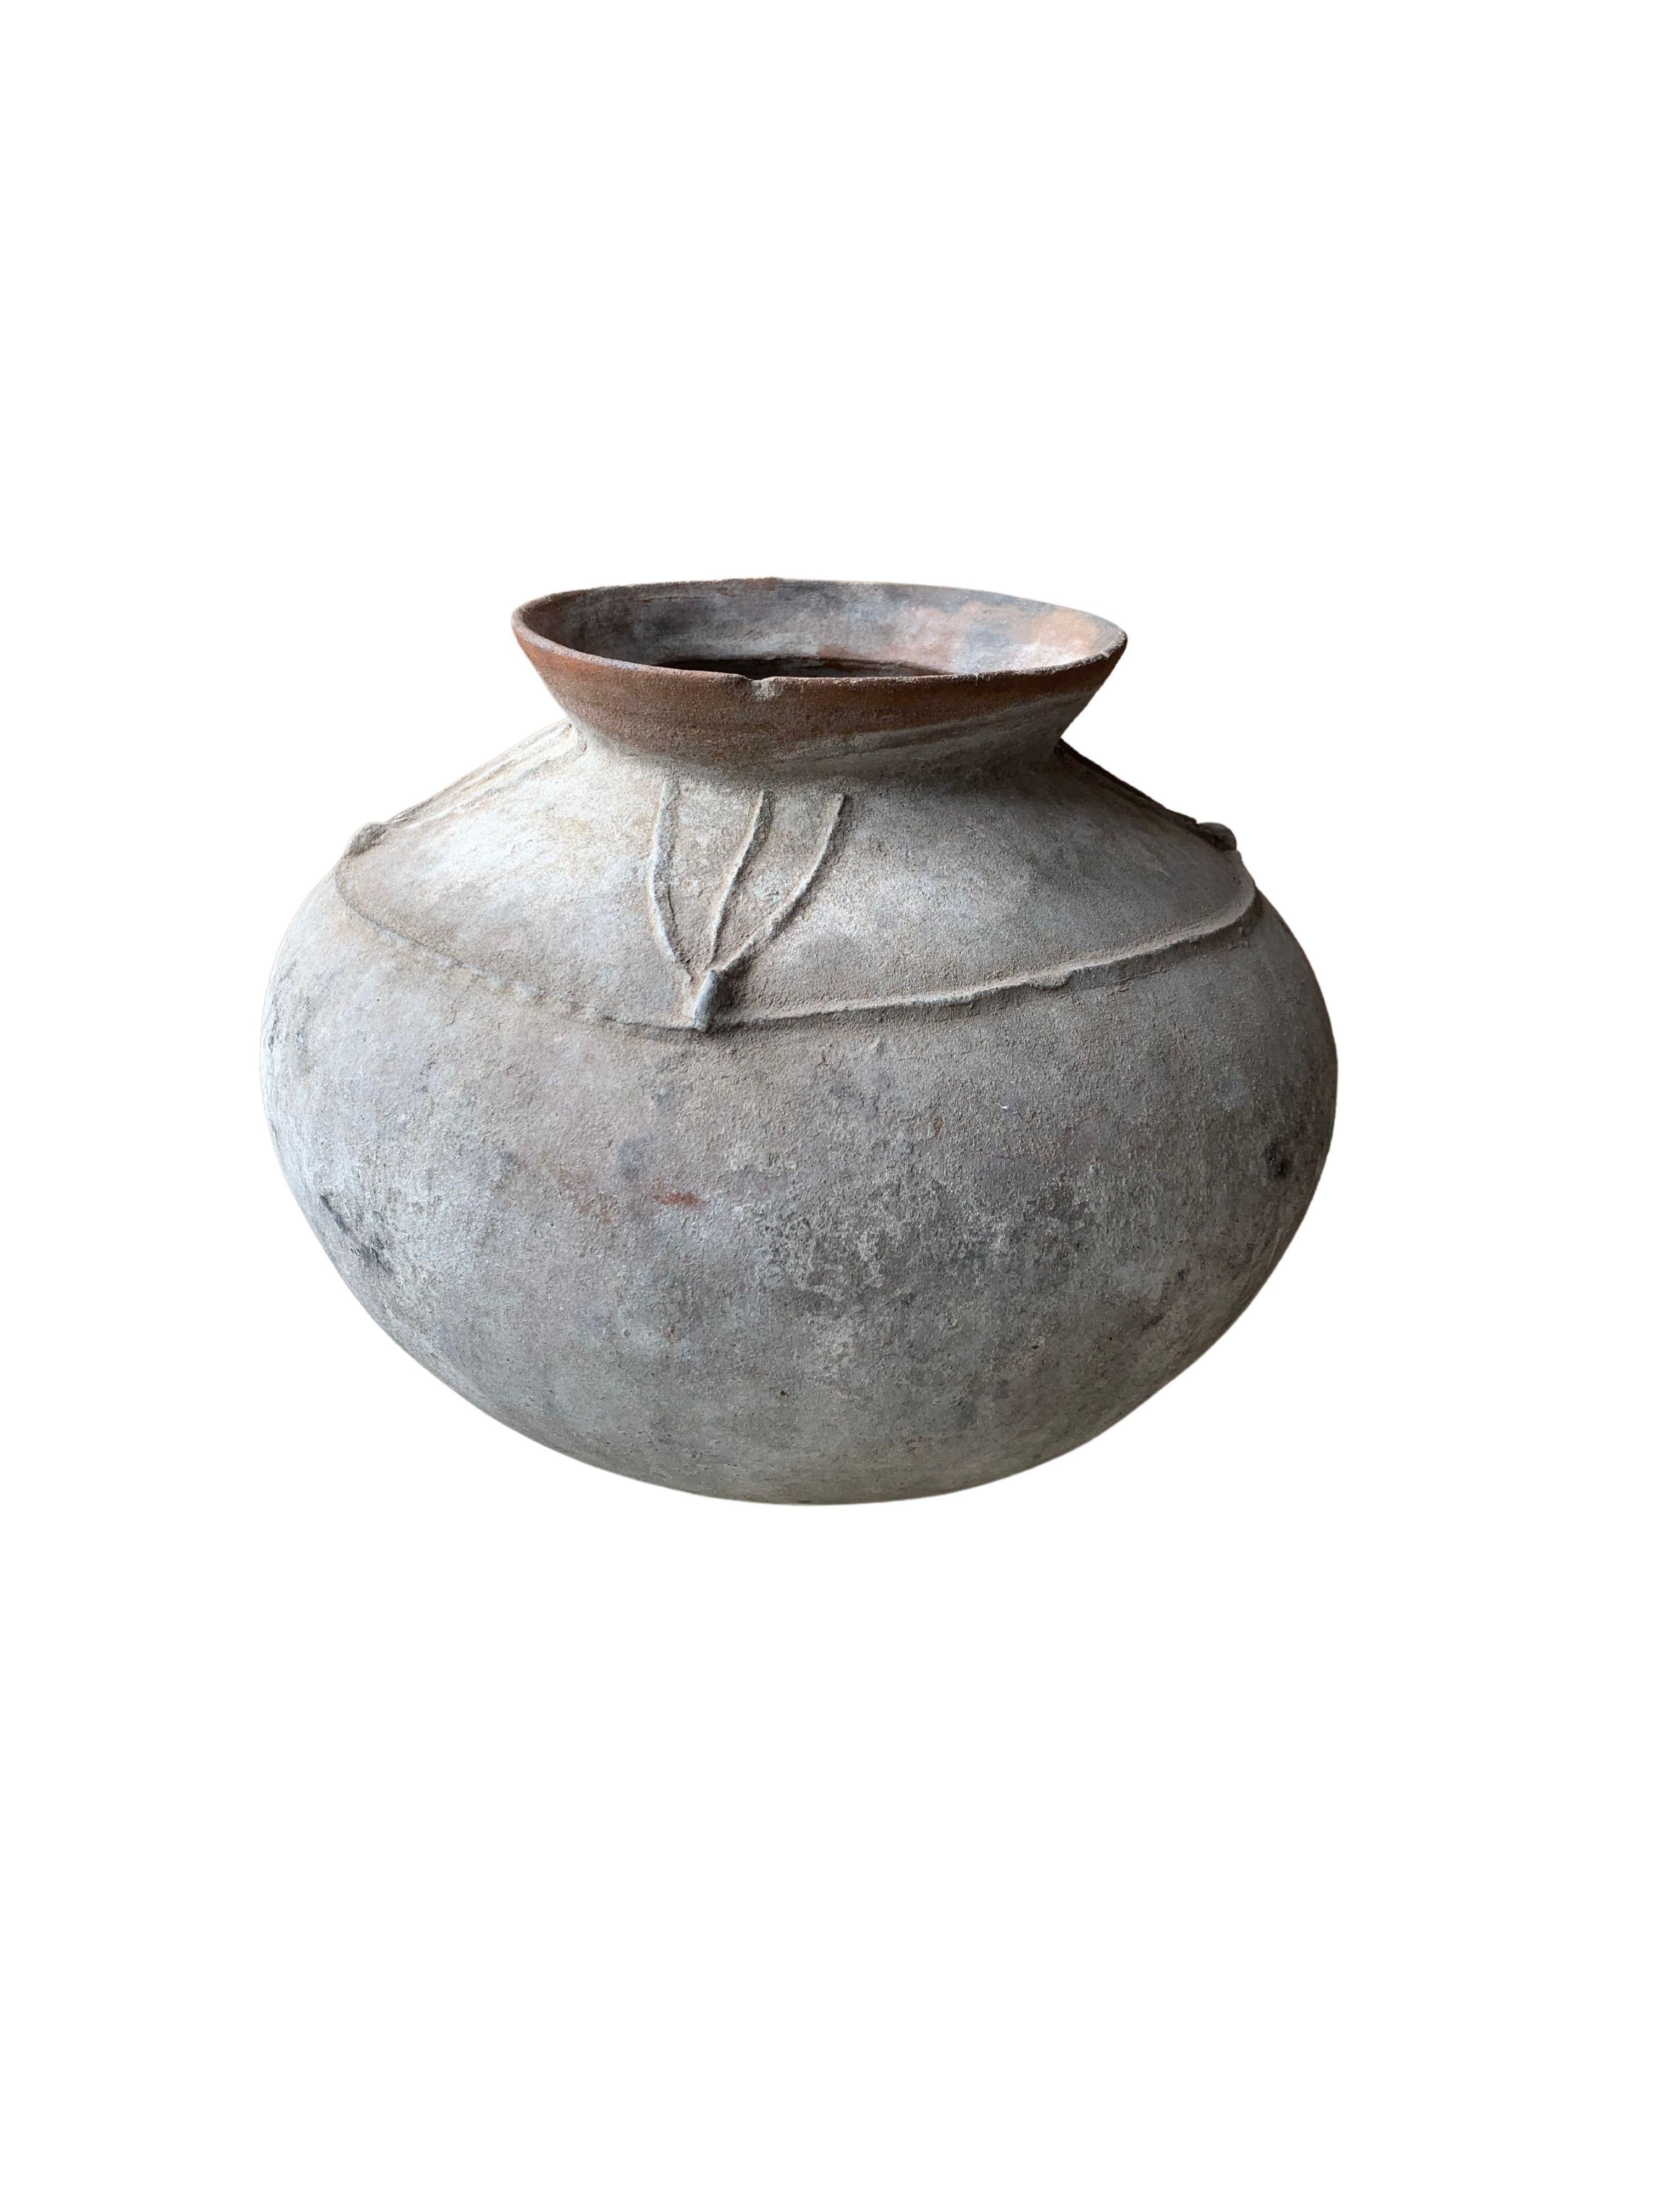 A visibly old Earthenware Pot from the Island of Sumba in Indonesia. A unique piece to add to a pottery collection or home decor. It features tribal motifs on its exterior. The pot has a wonderful age related patina and texture. Pots such as these